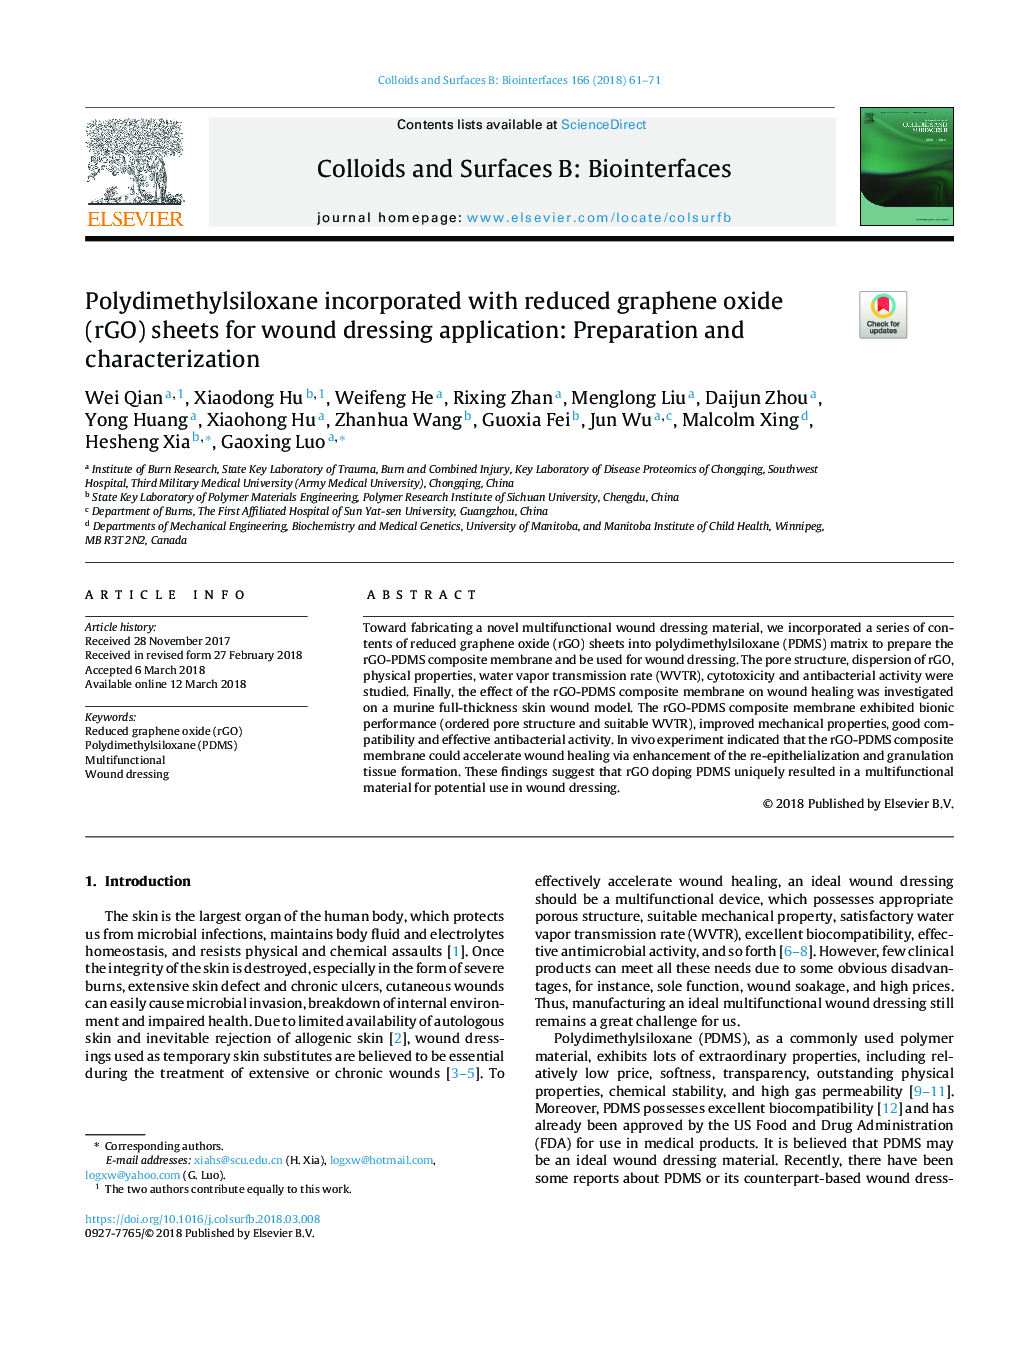 Polydimethylsiloxane incorporated with reduced graphene oxide (rGO) sheets for wound dressing application: Preparation and characterization